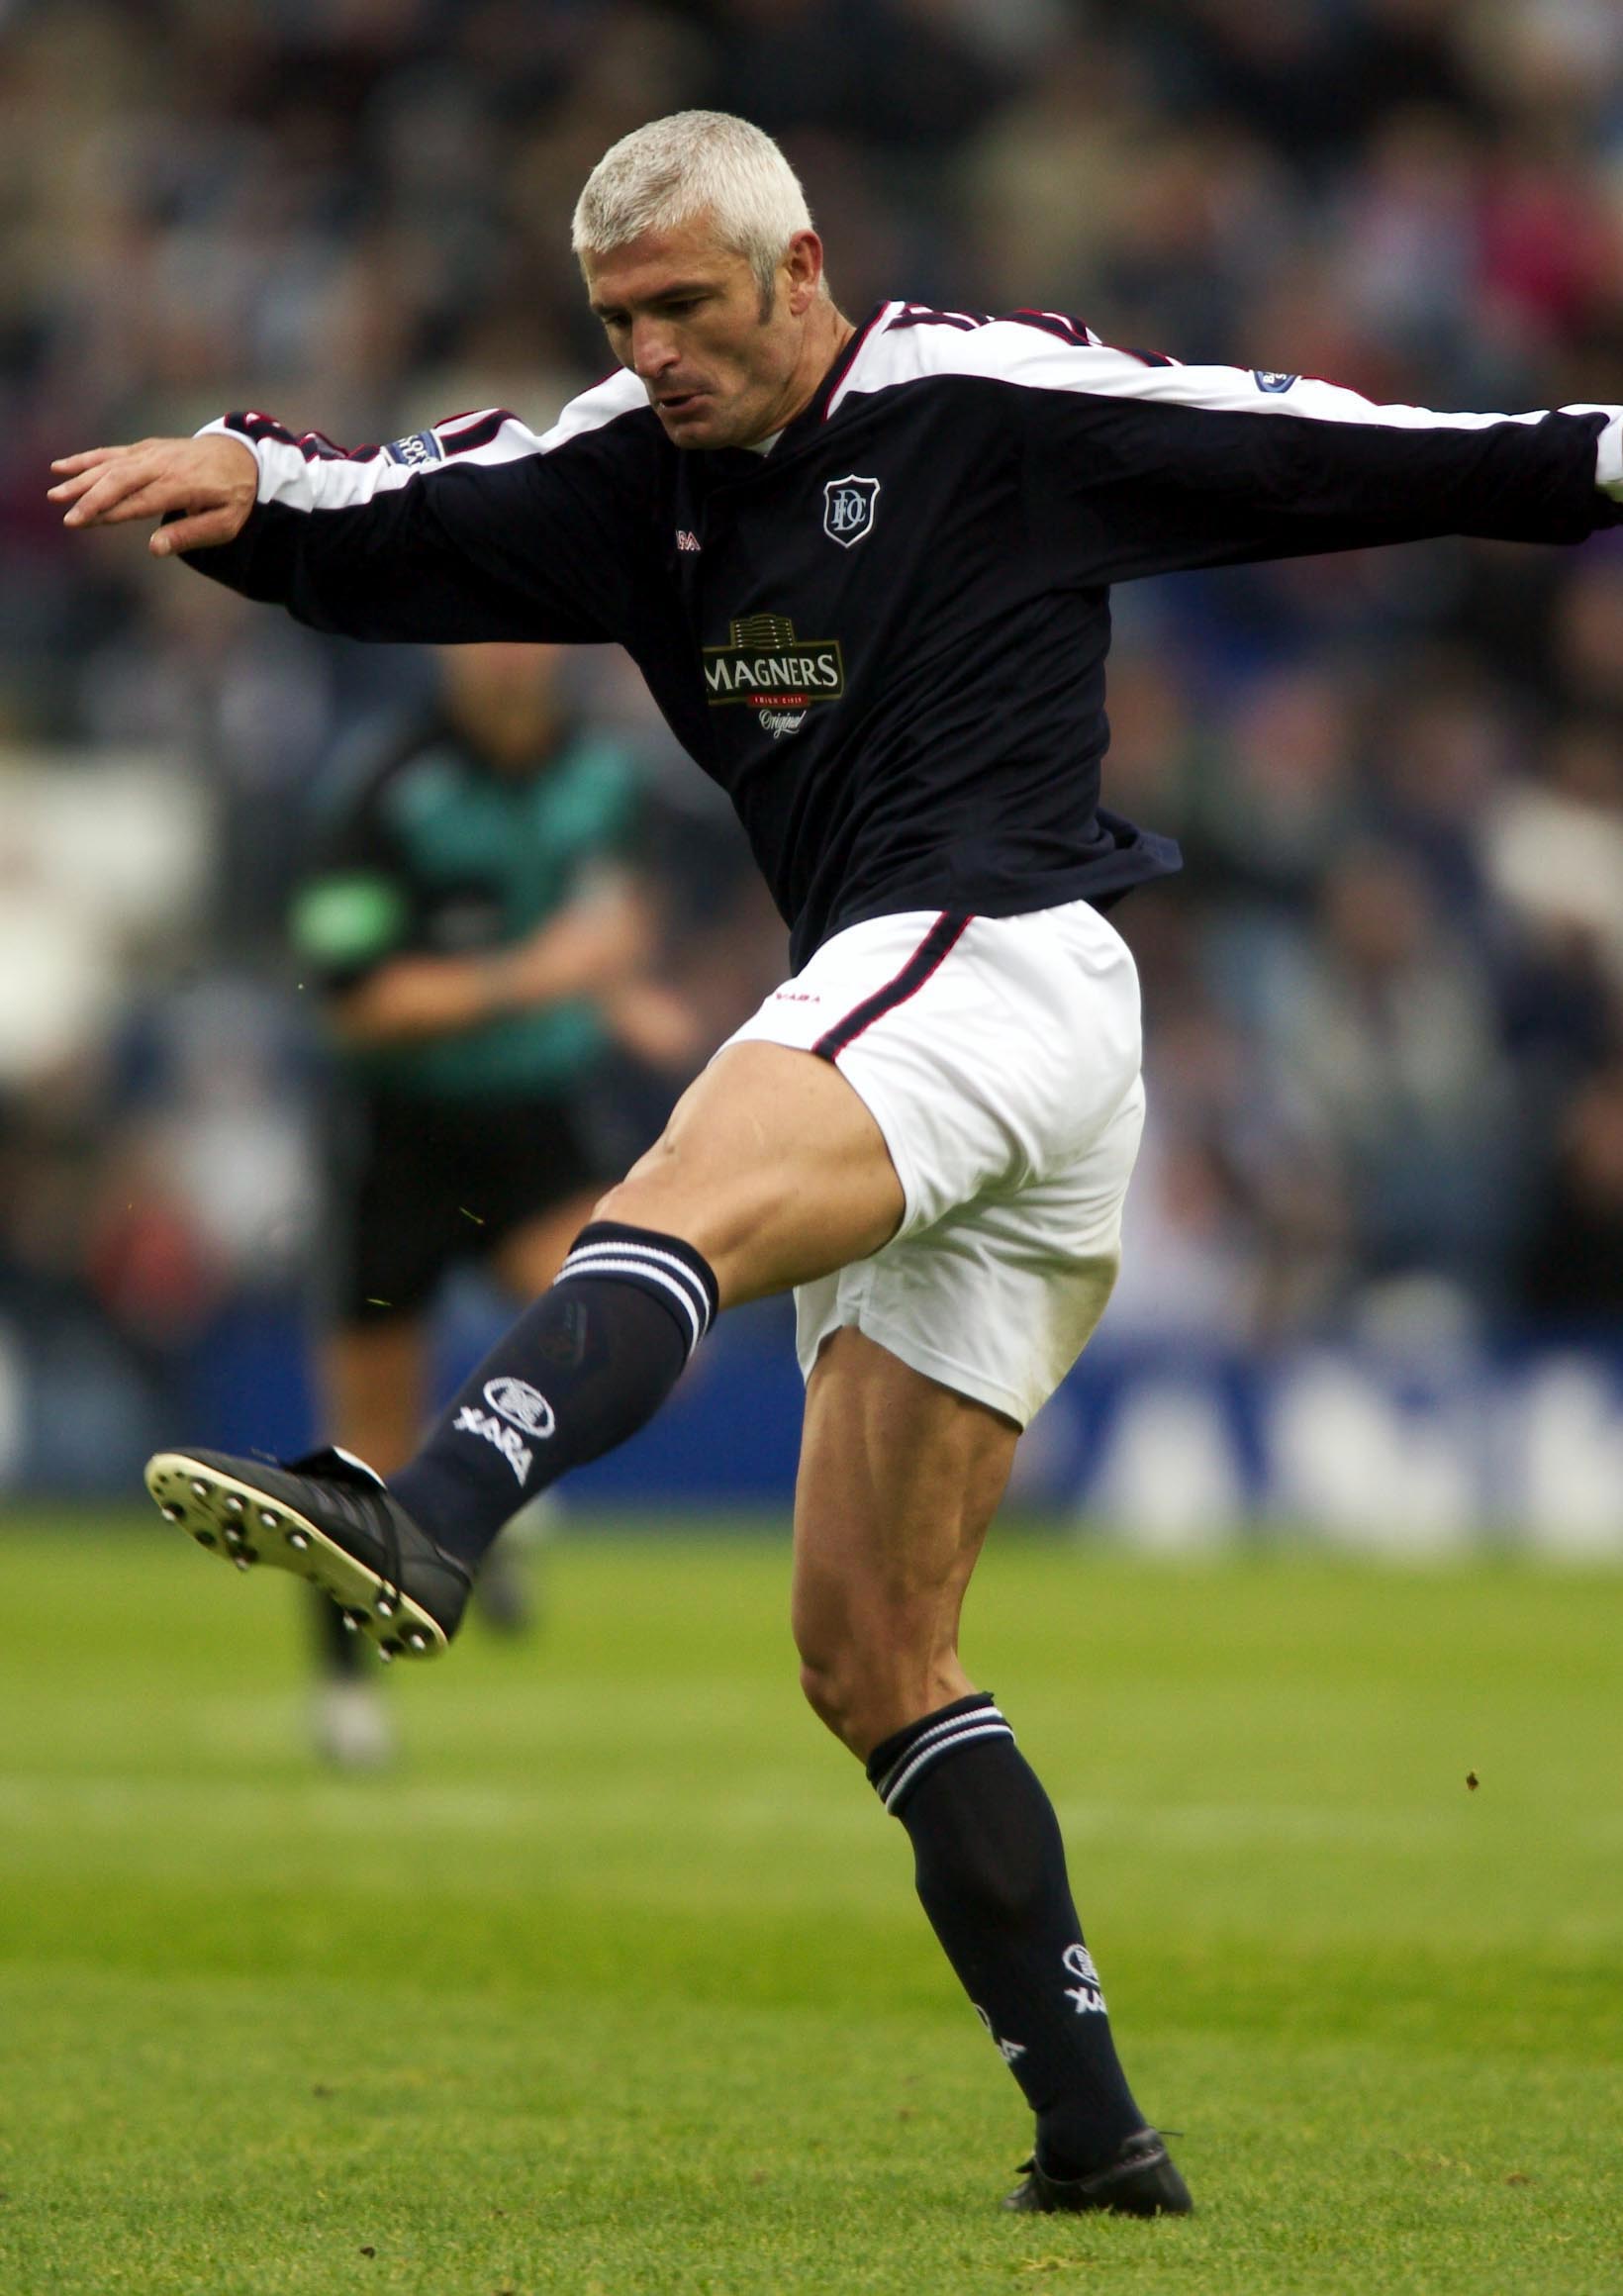 Fabrizio Ravanelli wants to be Dundee's new manager, saying: 'I